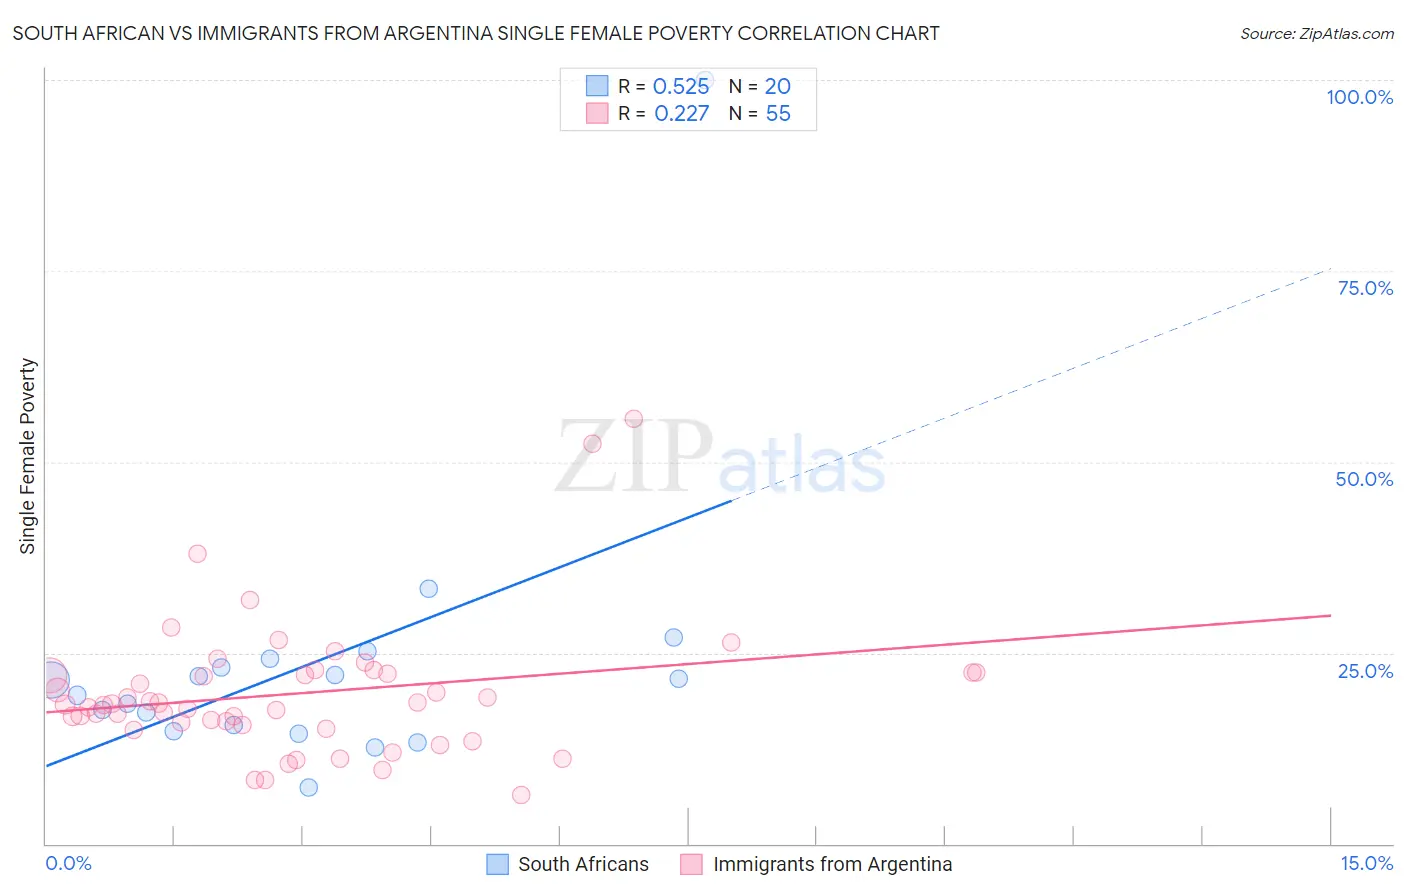 South African vs Immigrants from Argentina Single Female Poverty